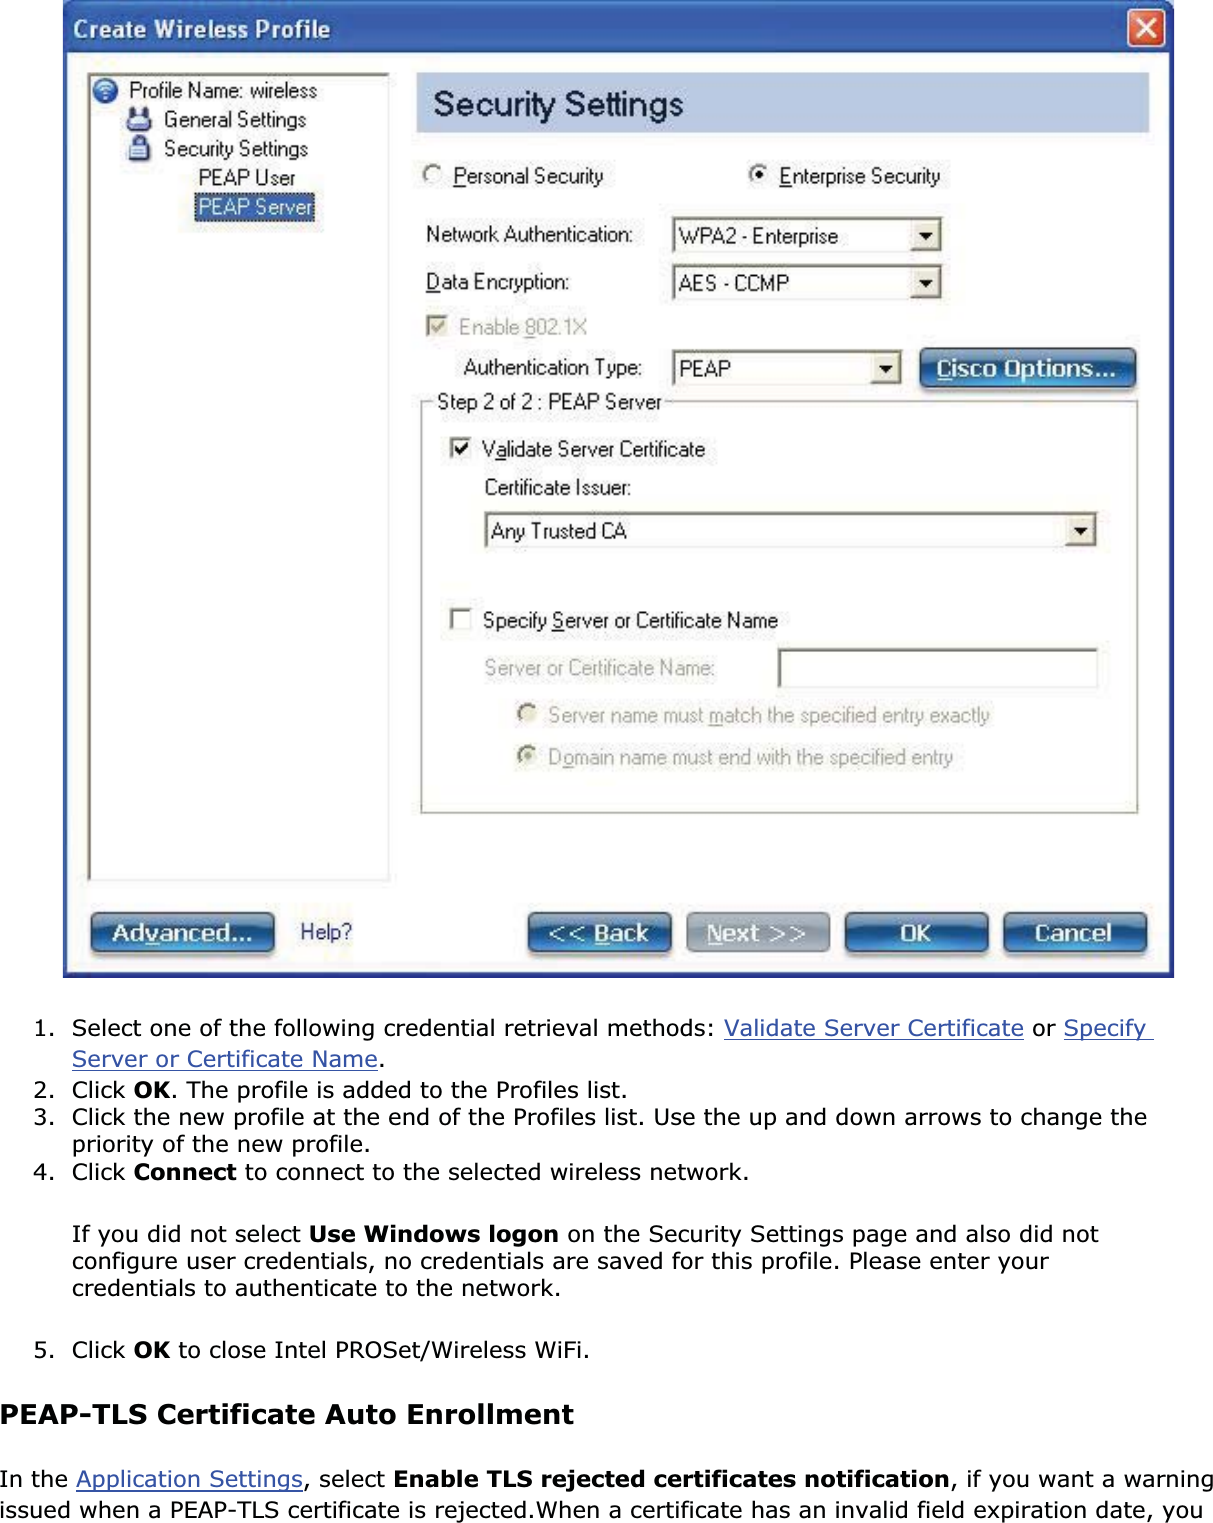 1. Select one of the following credential retrieval methods: Validate Server Certificate or SpecifyServer or Certificate Name.2. Click OK. The profile is added to the Profiles list.3. Click the new profile at the end of the Profiles list. Use the up and down arrows to change the priority of the new profile.4. Click Connect to connect to the selected wireless network.If you did not select Use Windows logon on the Security Settings page and also did not configure user credentials, no credentials are saved for this profile. Please enter your credentials to authenticate to the network. 5. Click OK to close Intel PROSet/Wireless WiFi.PEAP-TLS Certificate Auto EnrollmentIn the Application Settings, select Enable TLS rejected certificates notification, if you want a warning issued when a PEAP-TLS certificate is rejected.When a certificate has an invalid field expiration date, you 